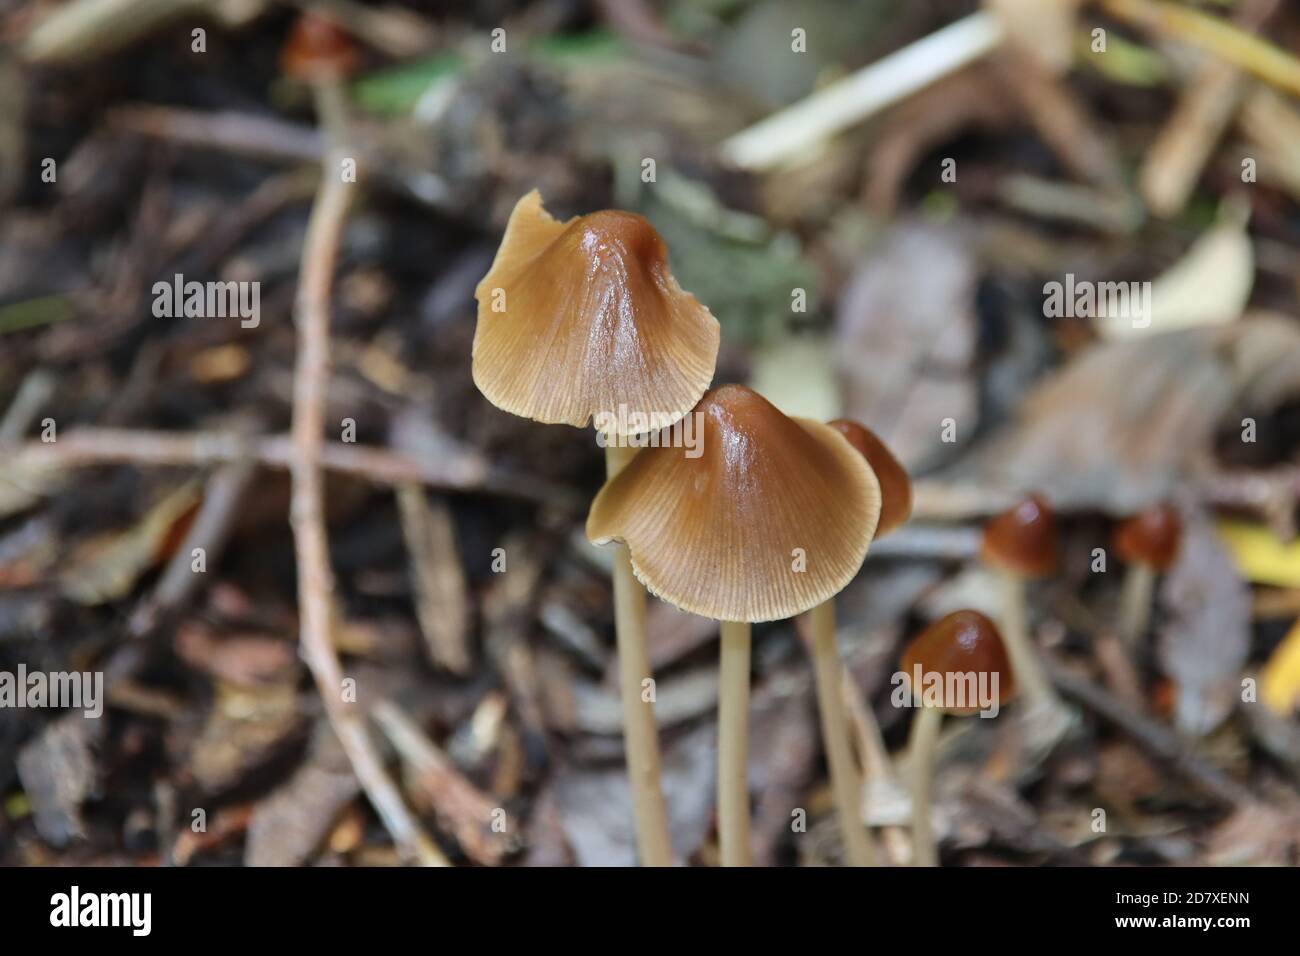 Psathyrella conopilus fungi with brown pointed head in the forest Stock Photo